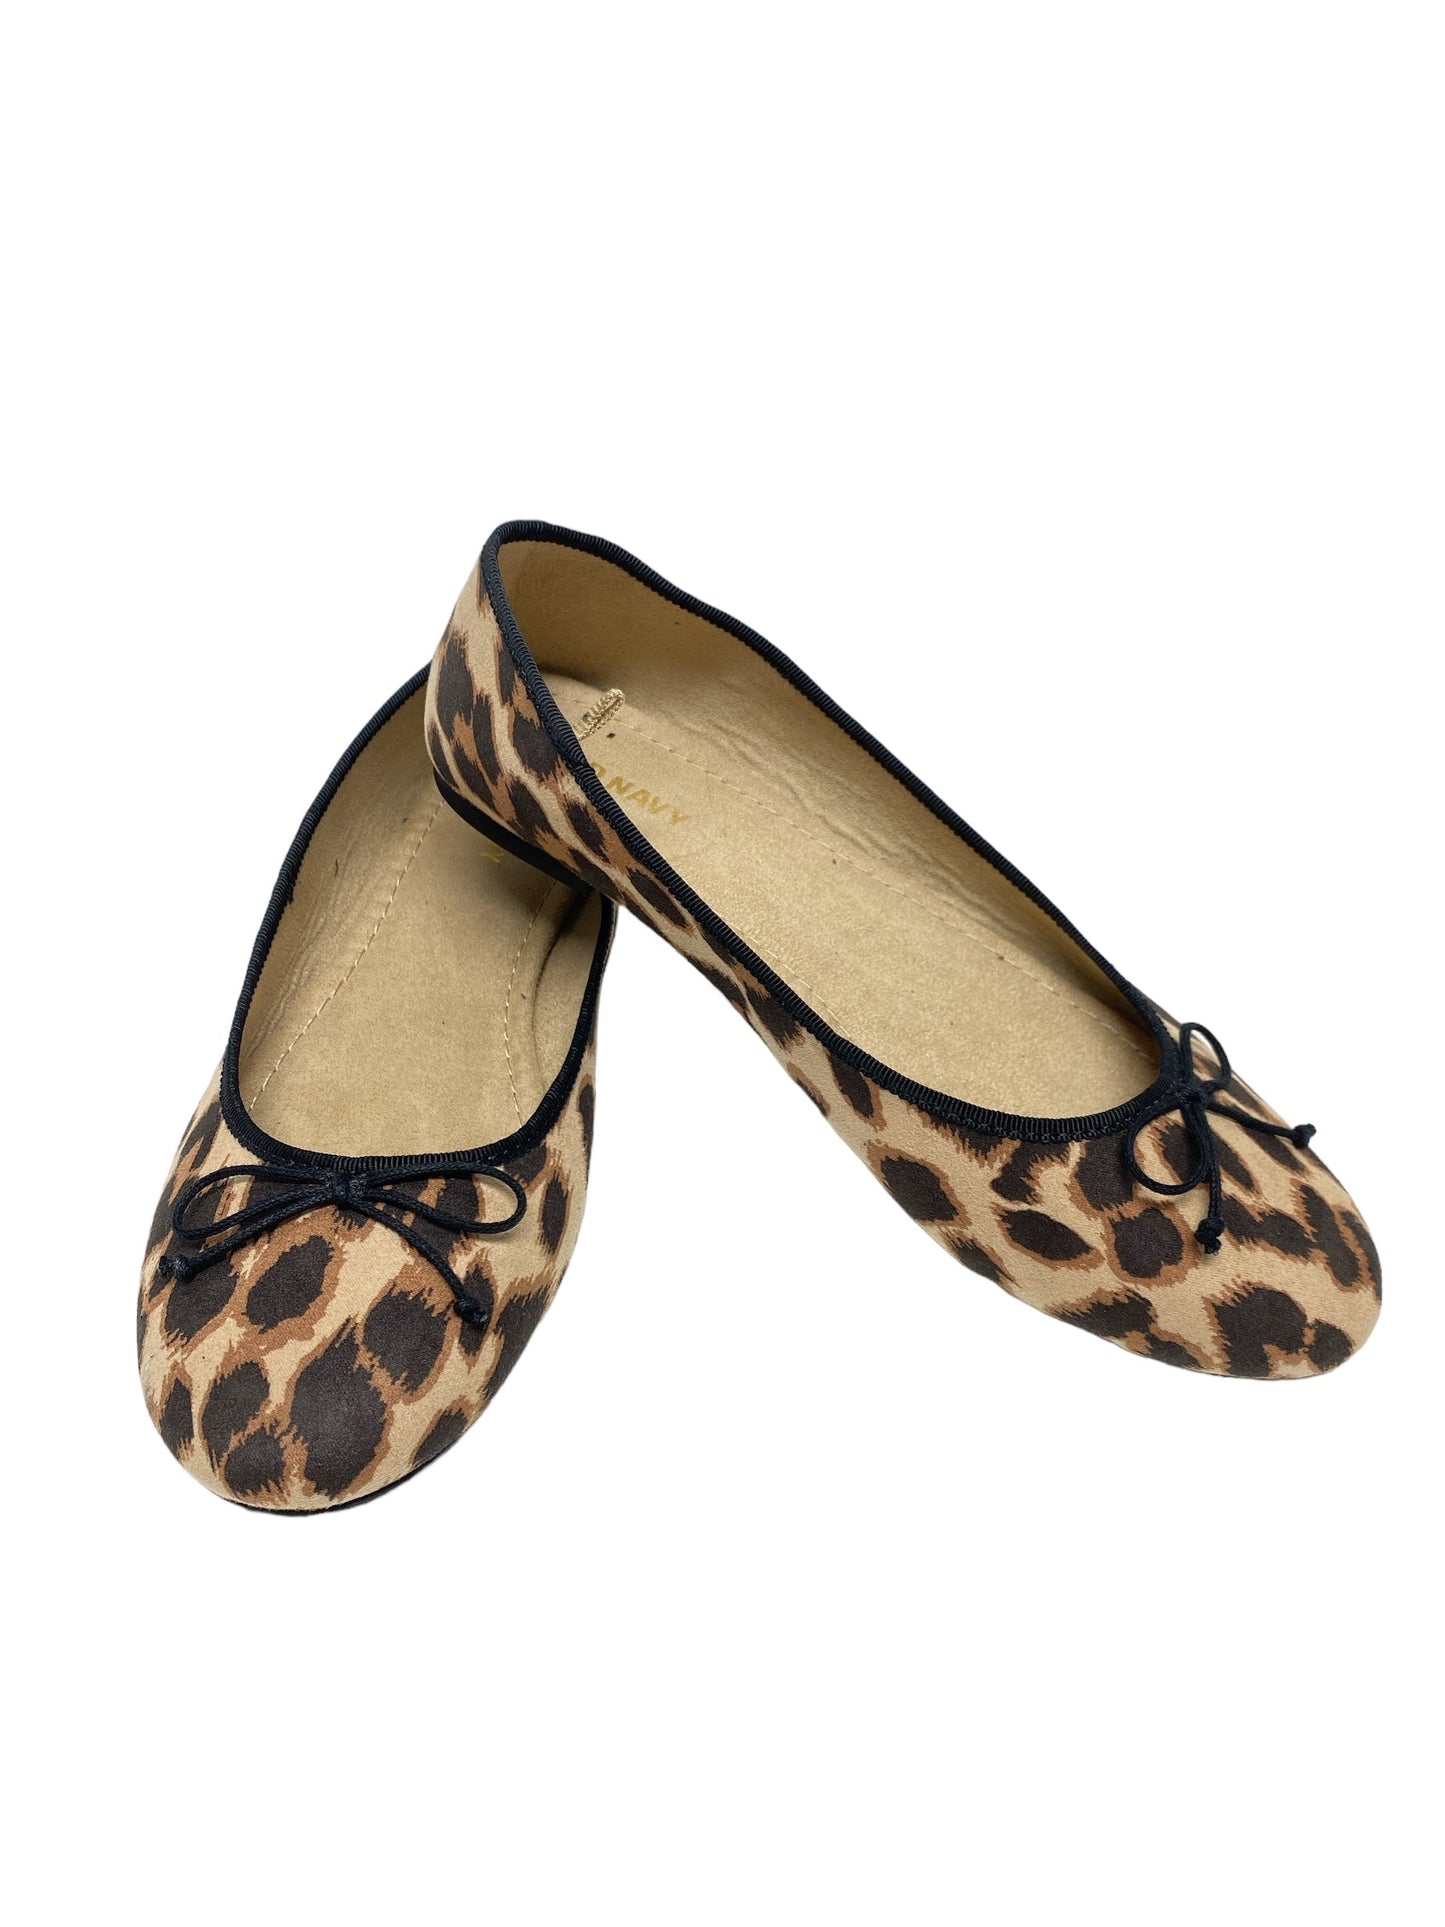 Animal Print Shoes Flats Old Navy, Size 6